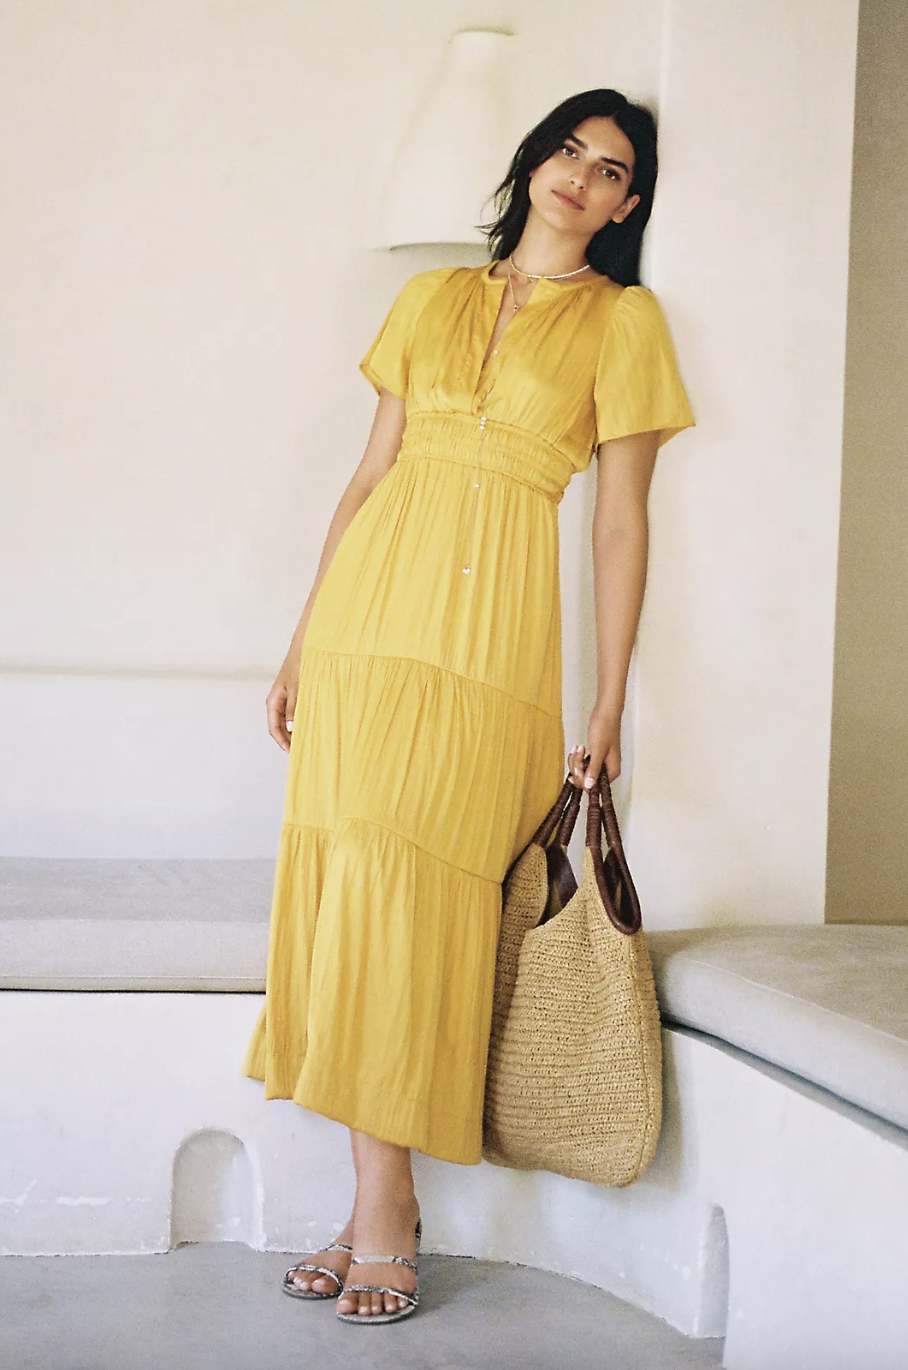 model with dark hair leaning against wall holding rattan bag wearing yellow maxi dress, The Somerset Maxi Dress in mango (Photo via Anthropologie)